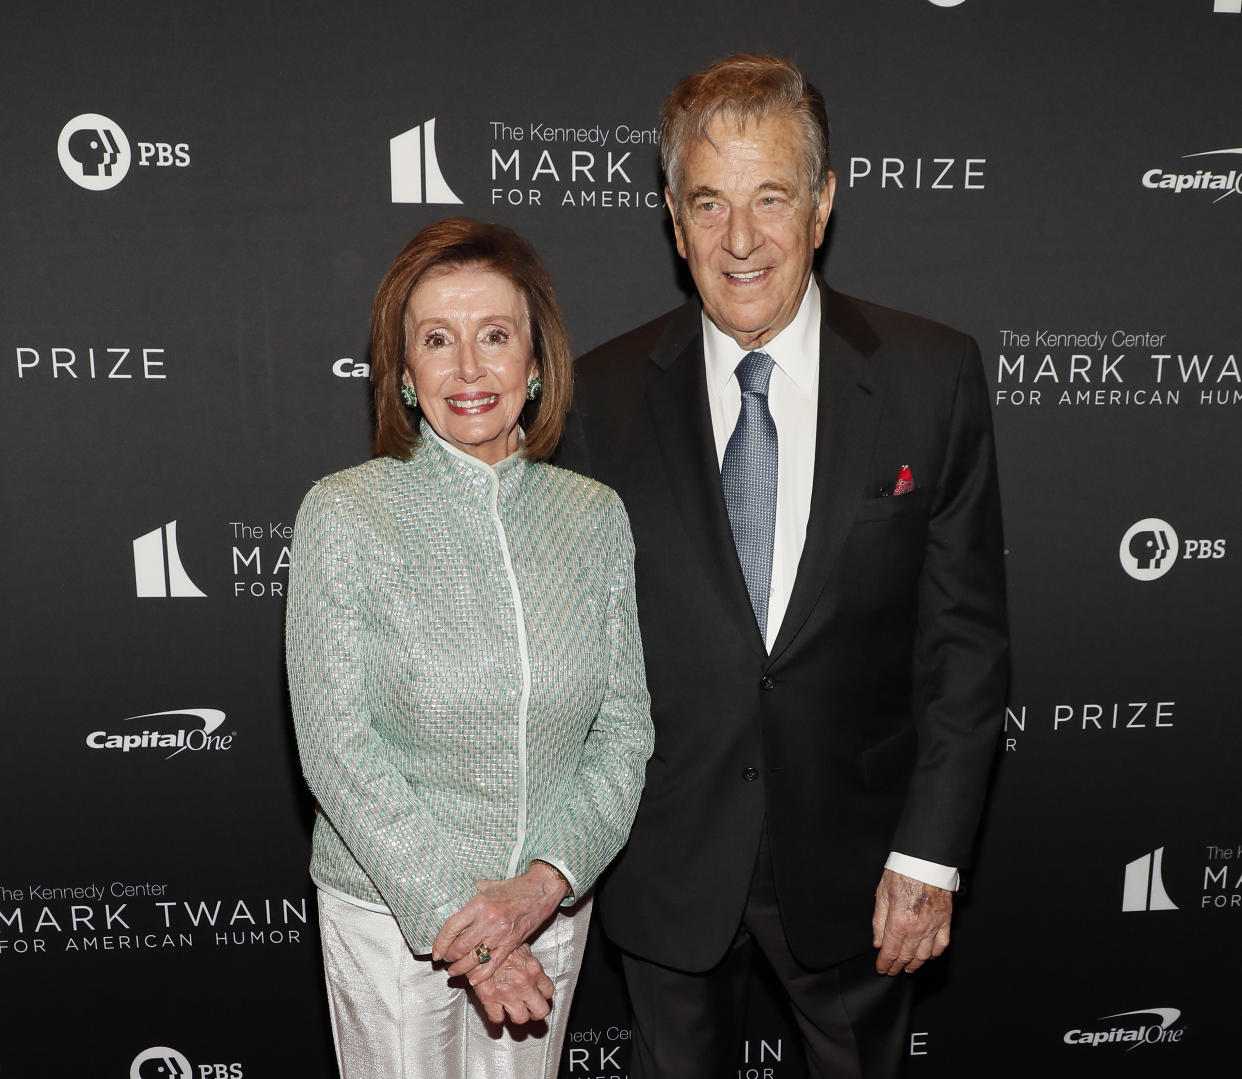 WASHINGTON, DC - APRIL 24: Nancy Pelosi and Paul Pelosi attend the 23rd Annual Mark Twain Prize For American Humor at The Kennedy Center on April 24, 2022 in Washington, DC. (Photo by Paul Morigi/Getty Images)